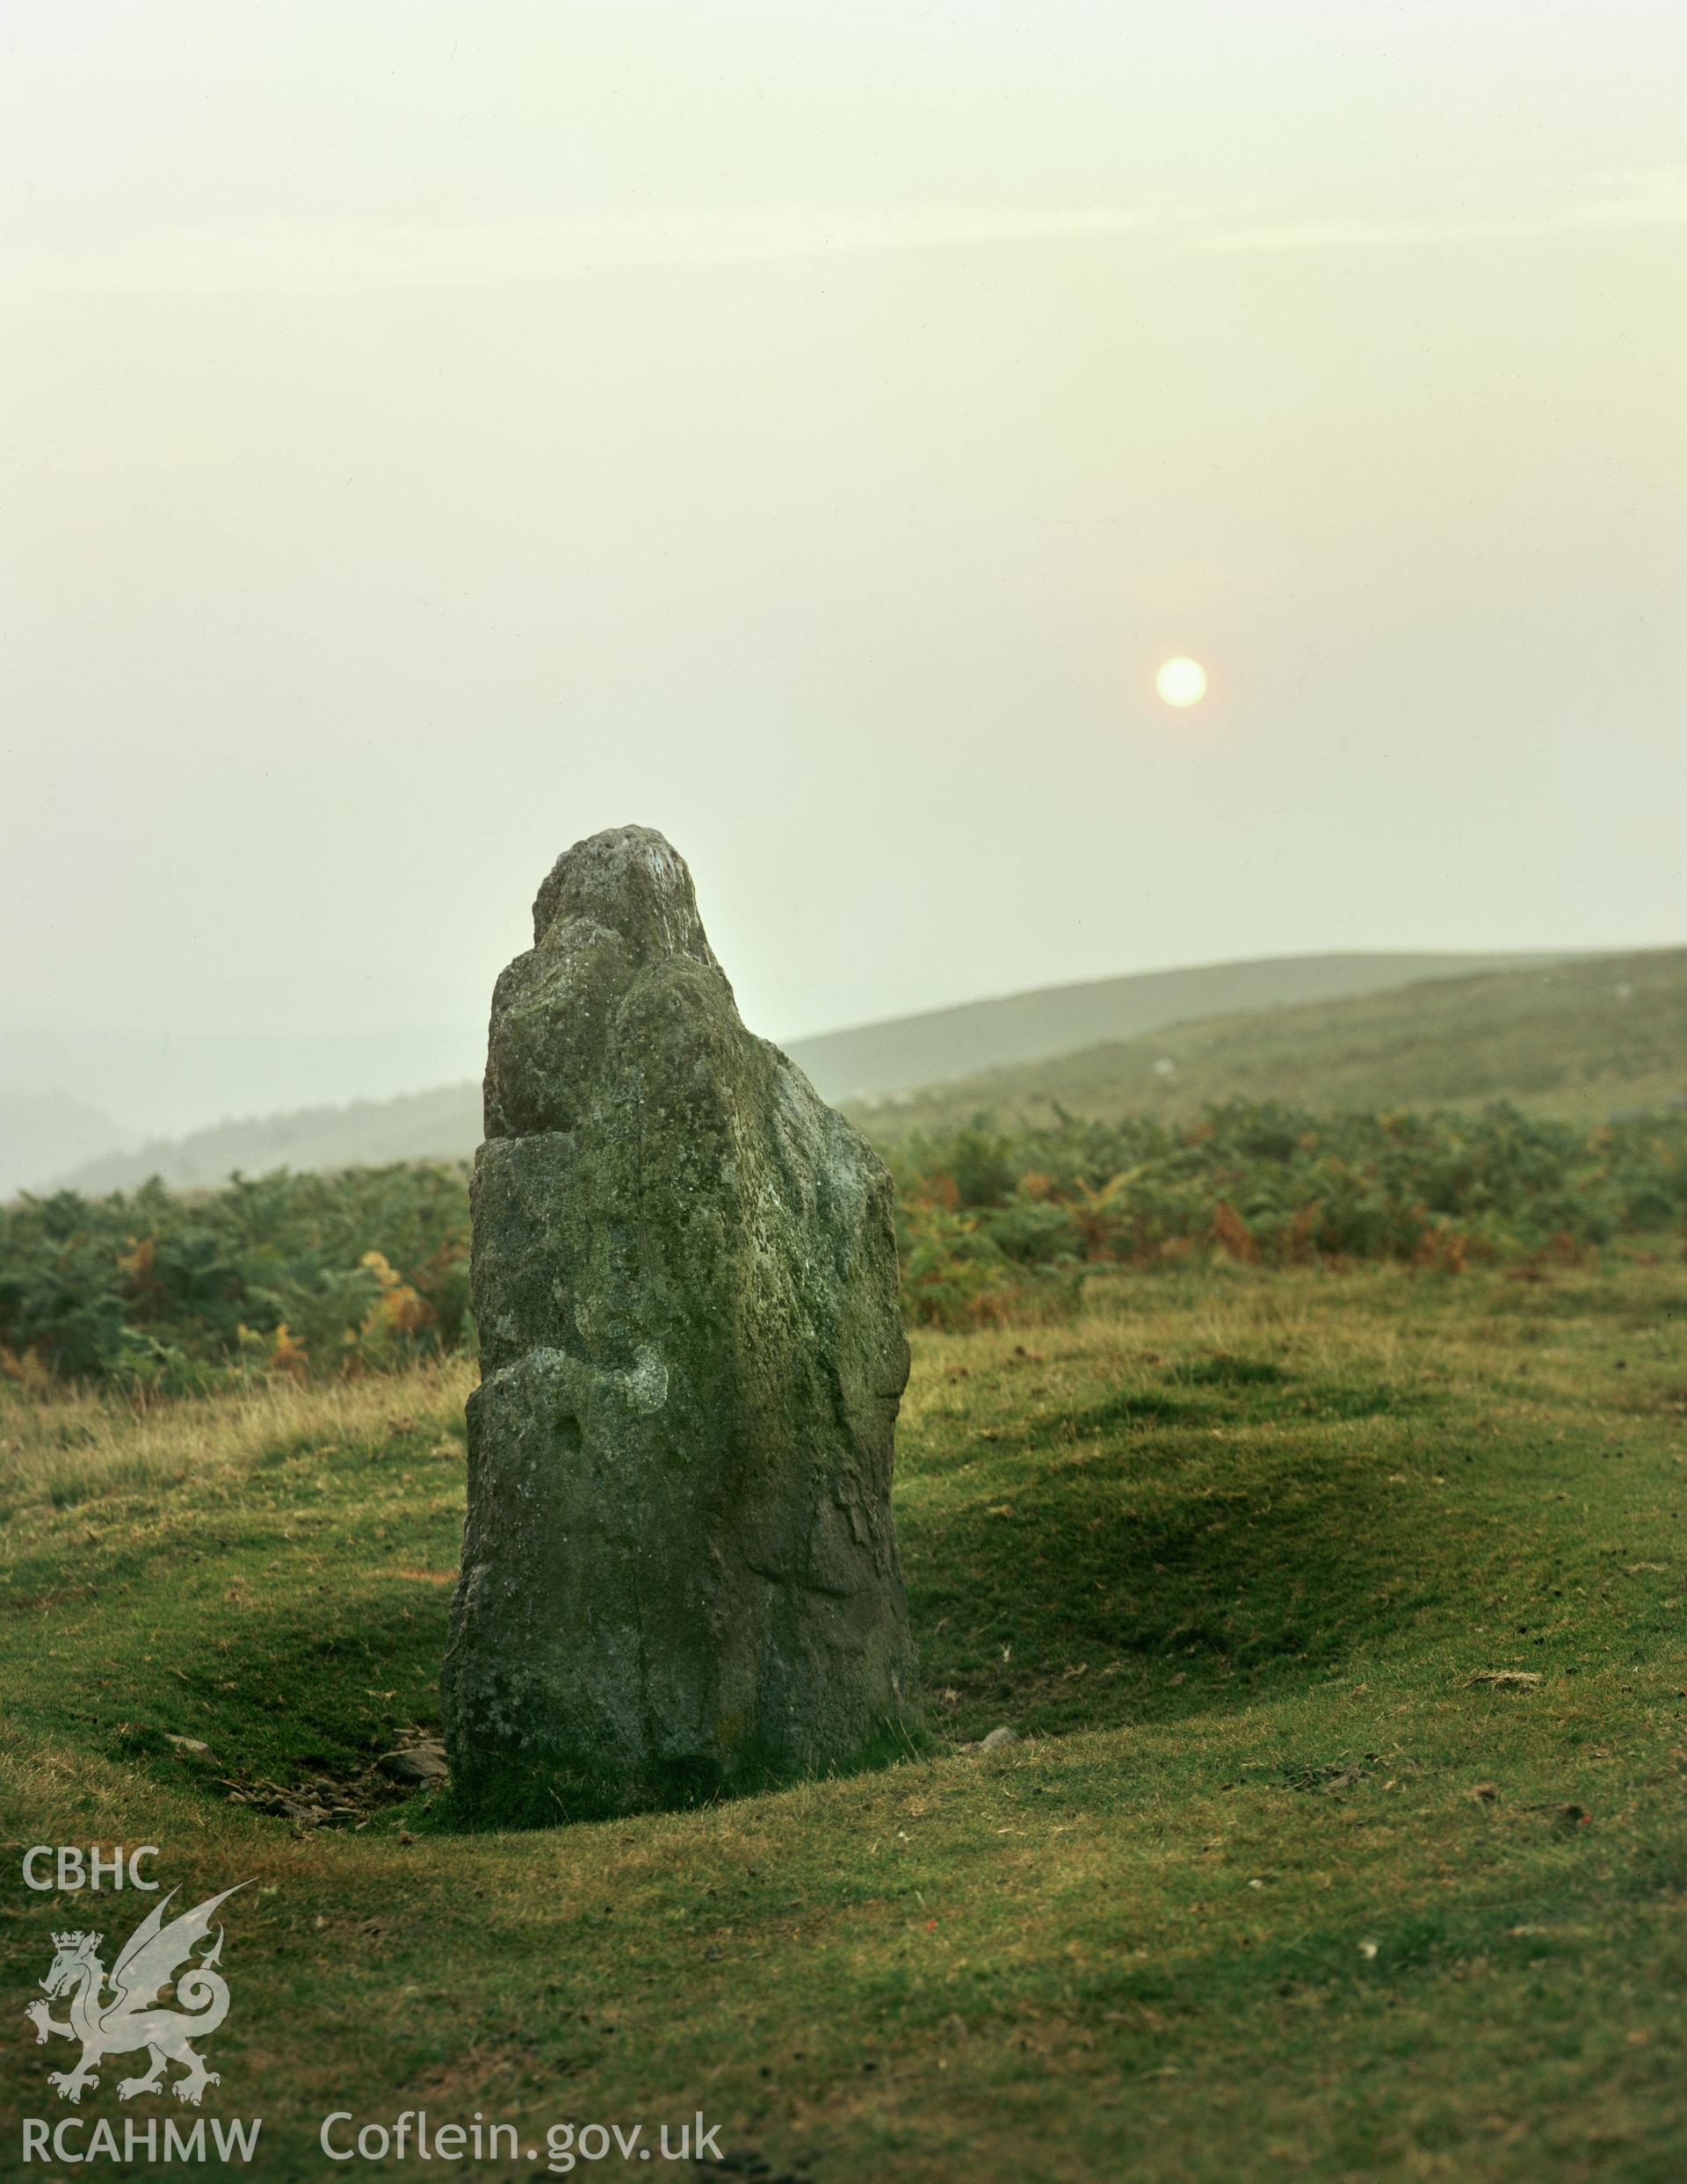 RCAHMW colour transparency of a view of the standing stone at Maen Richard.